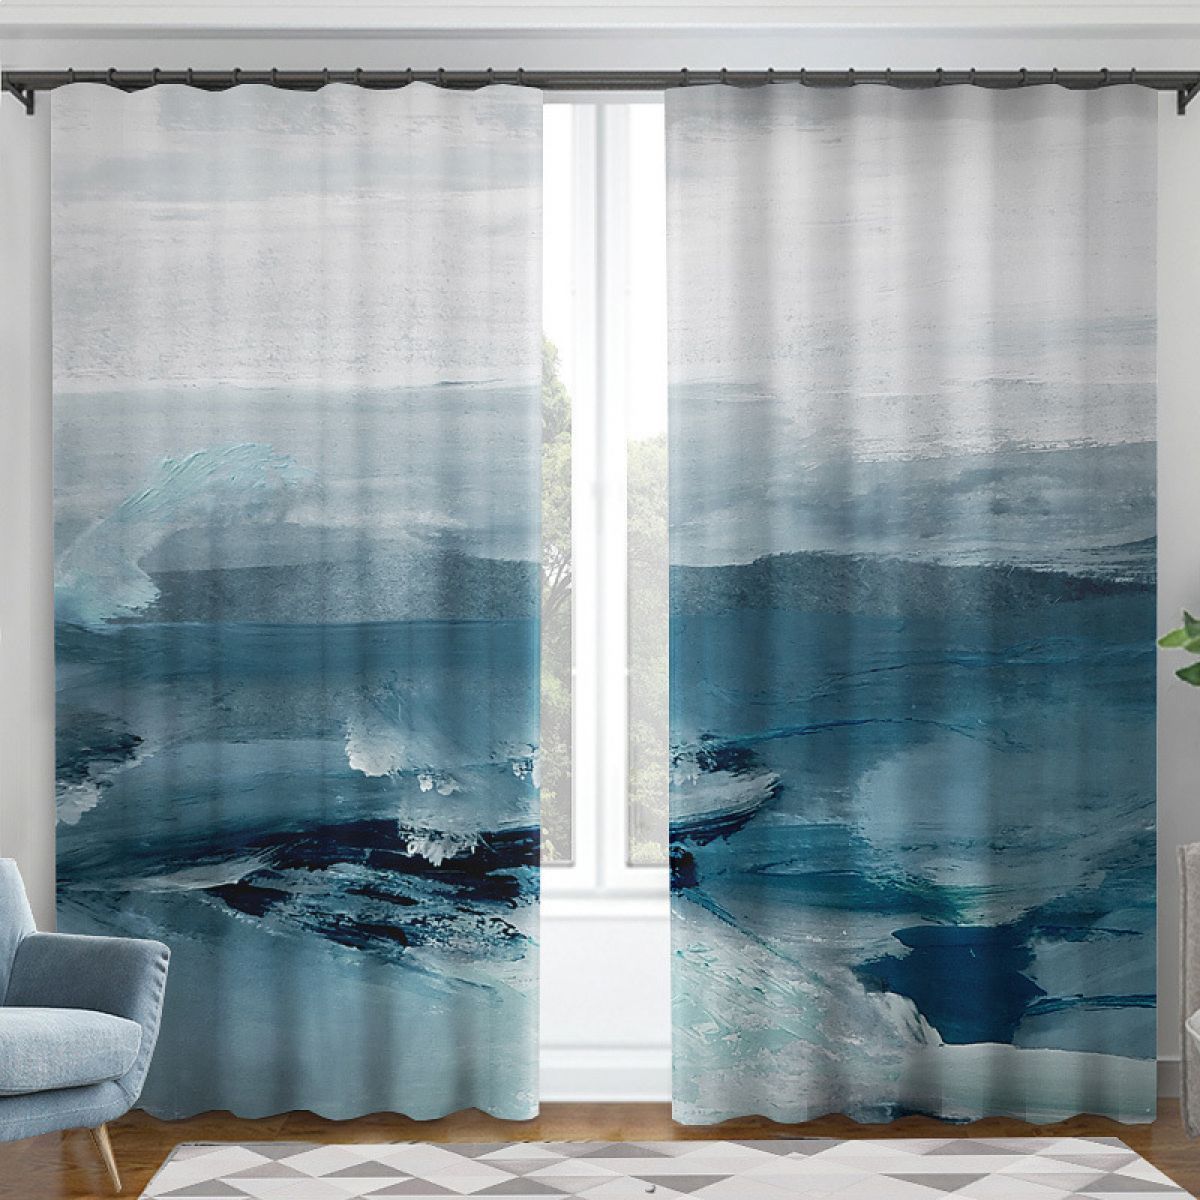 3d abstract oil painting iceberg printed window curtain home decor 7019